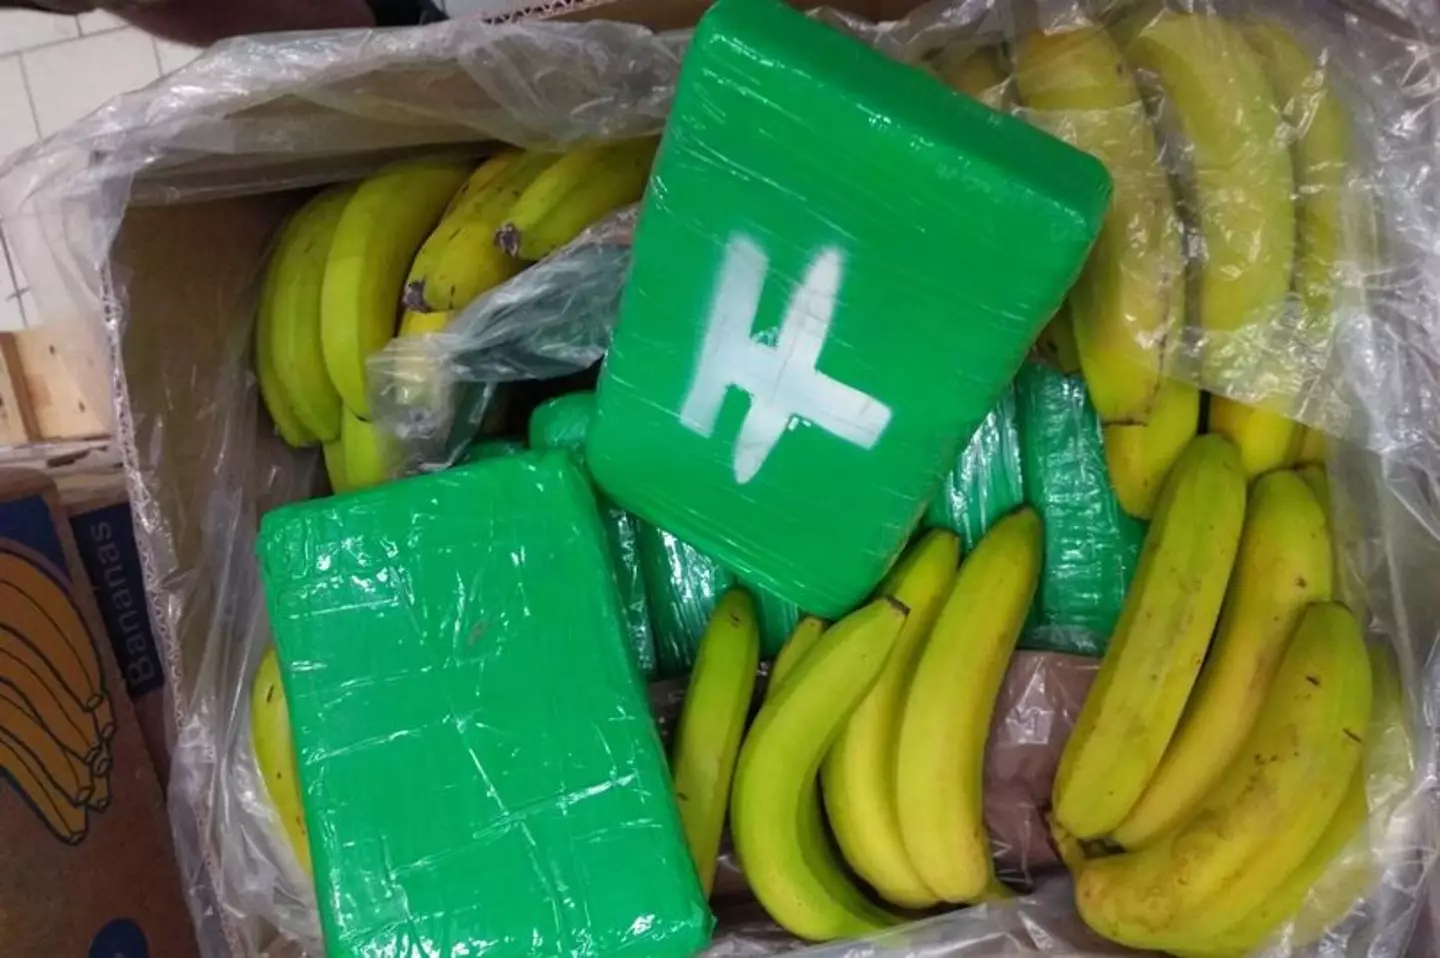 The cocaine was found inside boxes of bananas.